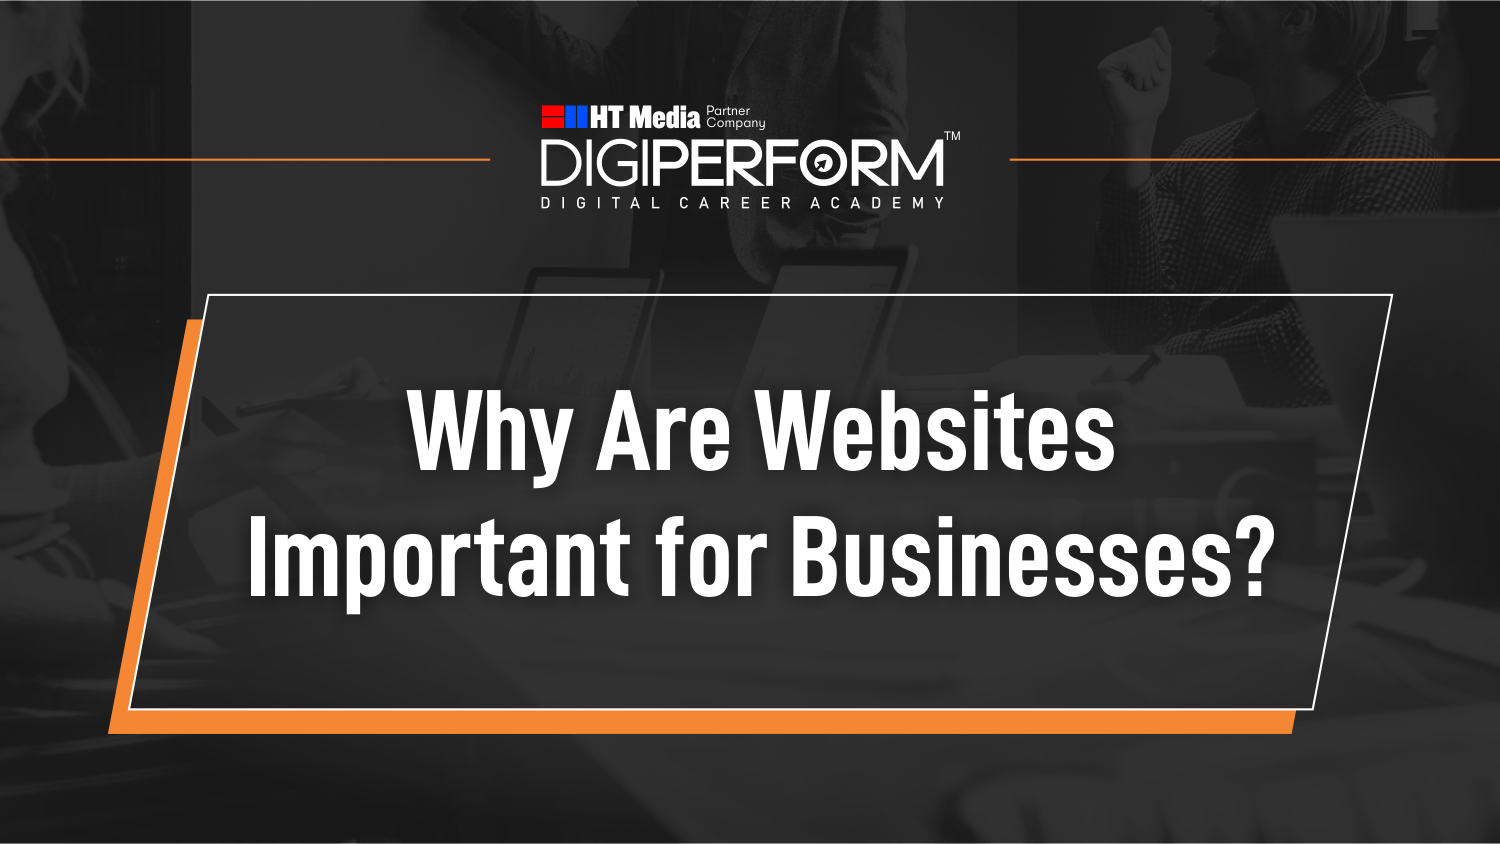 Why Are Websites Important for Businesses?